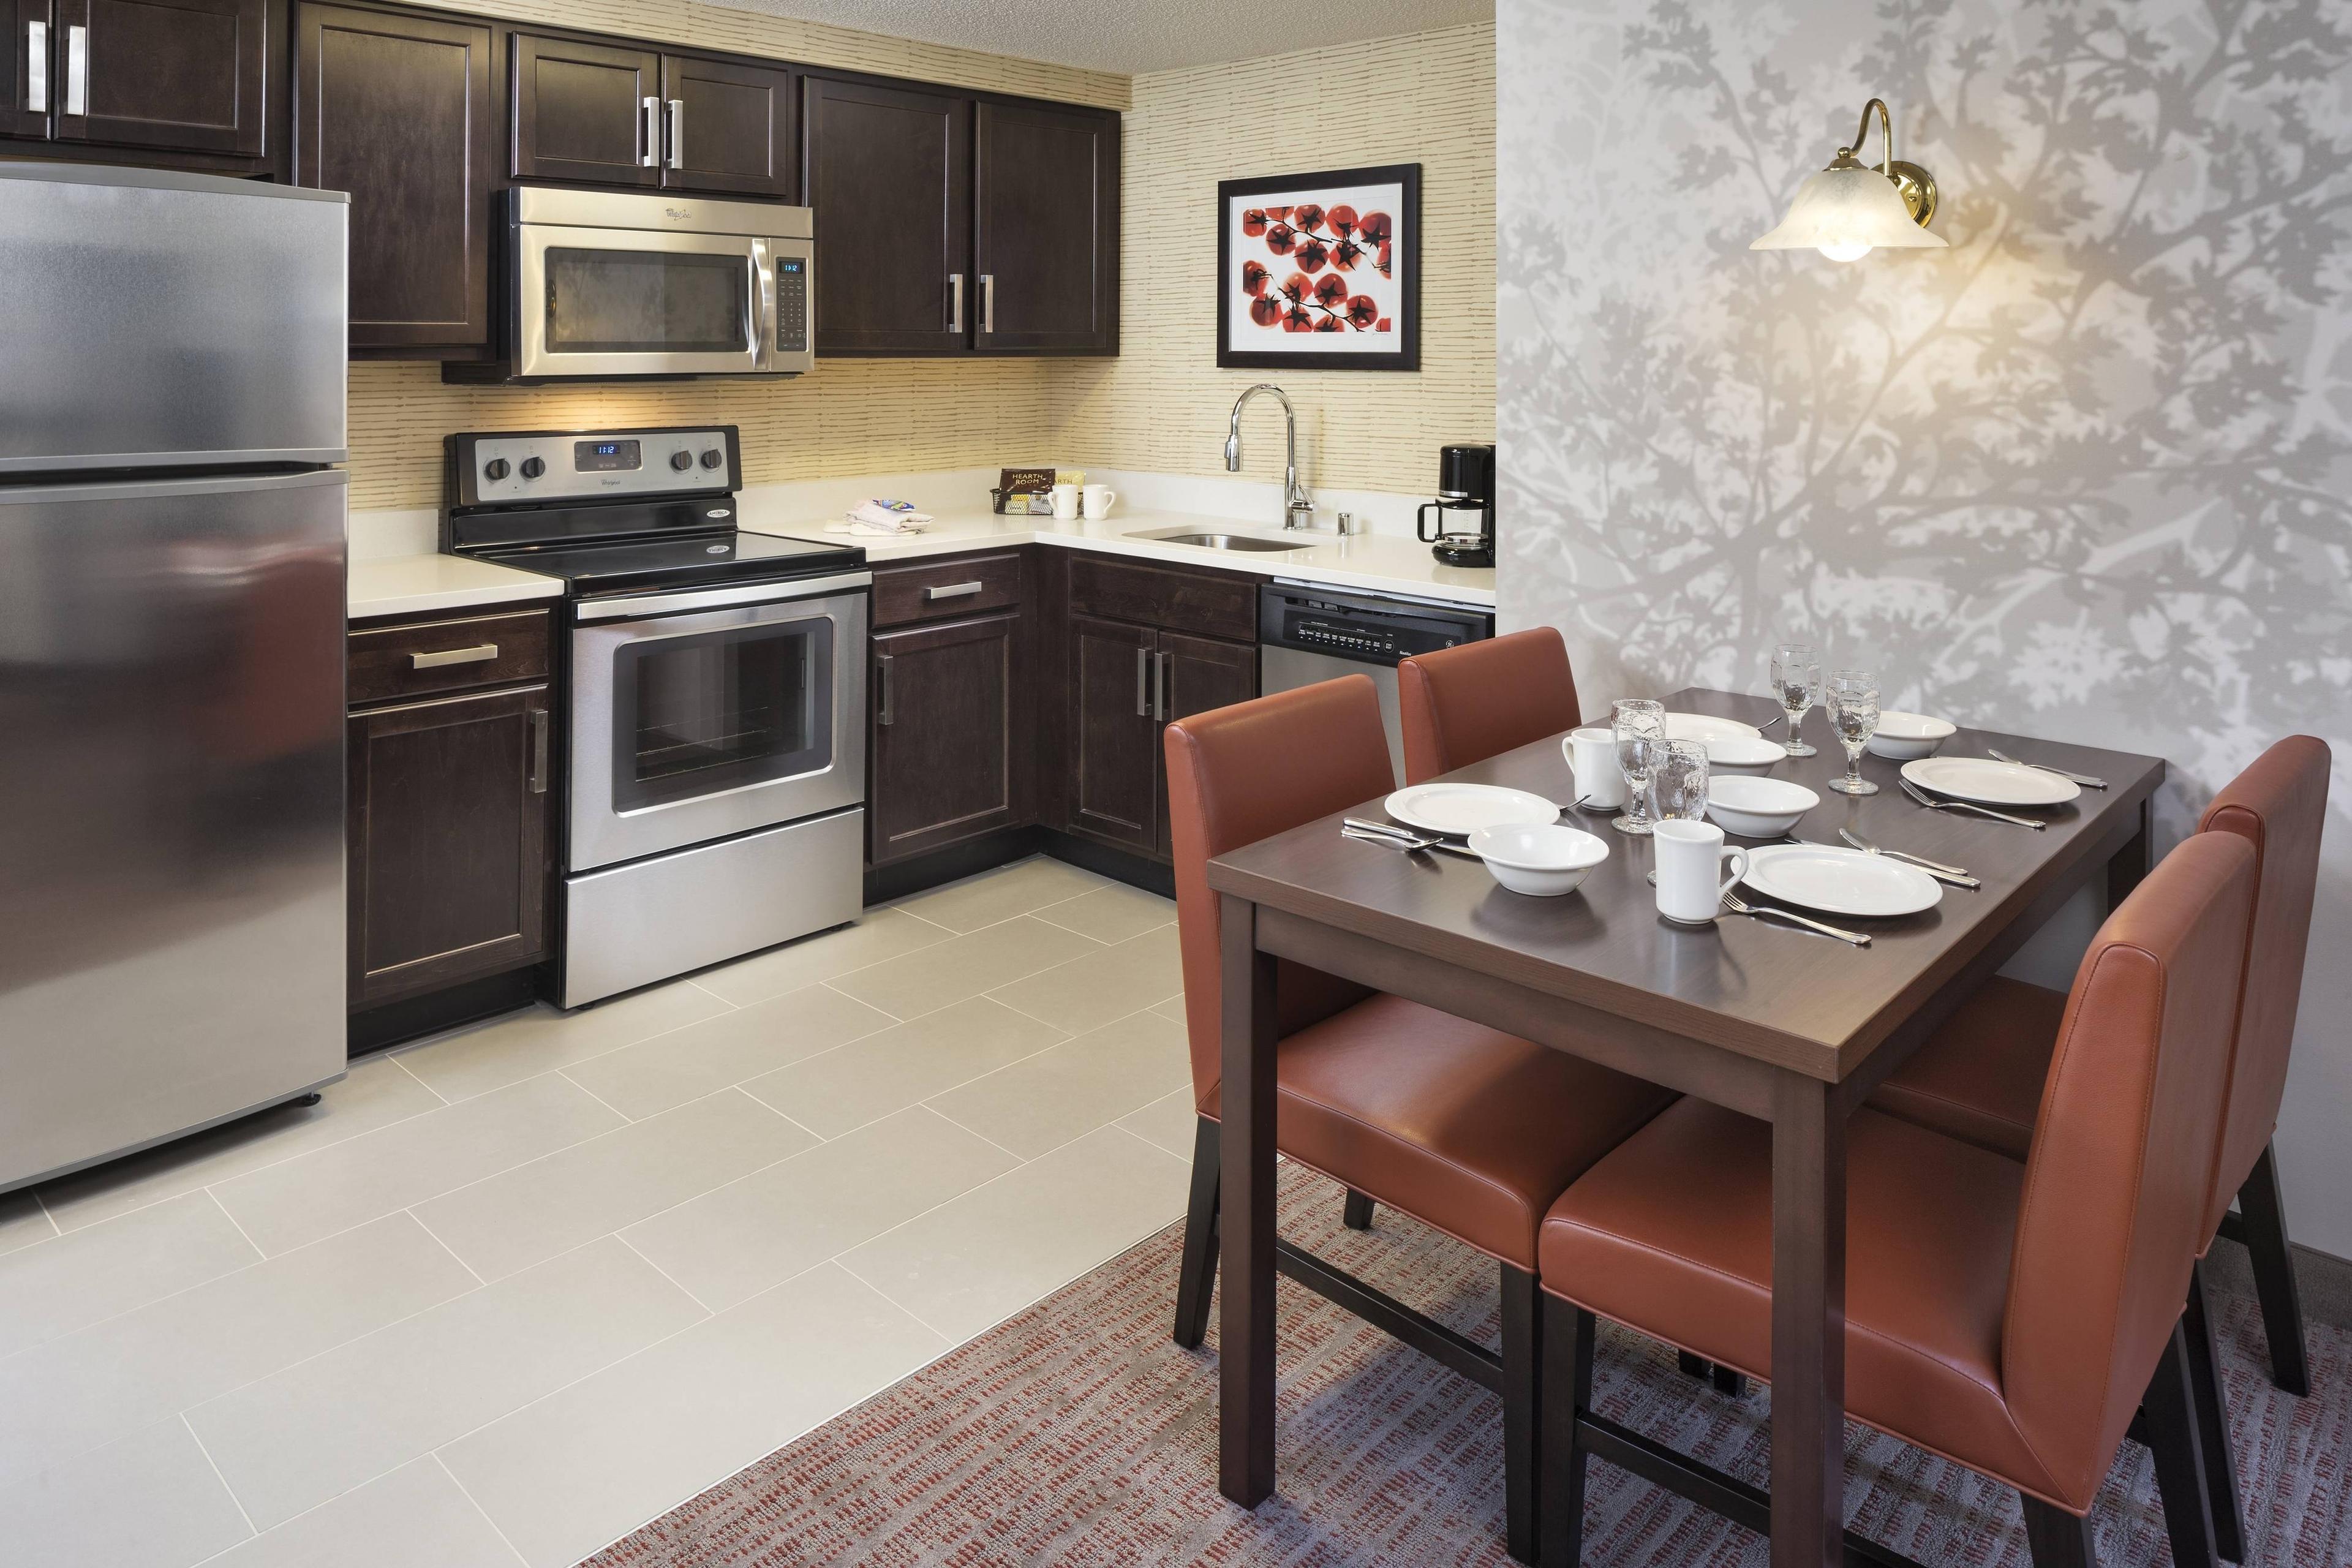 Our Two-Bedroom Suite with fireplace offers a larger kitchen and living area for a family to relax and unwind.